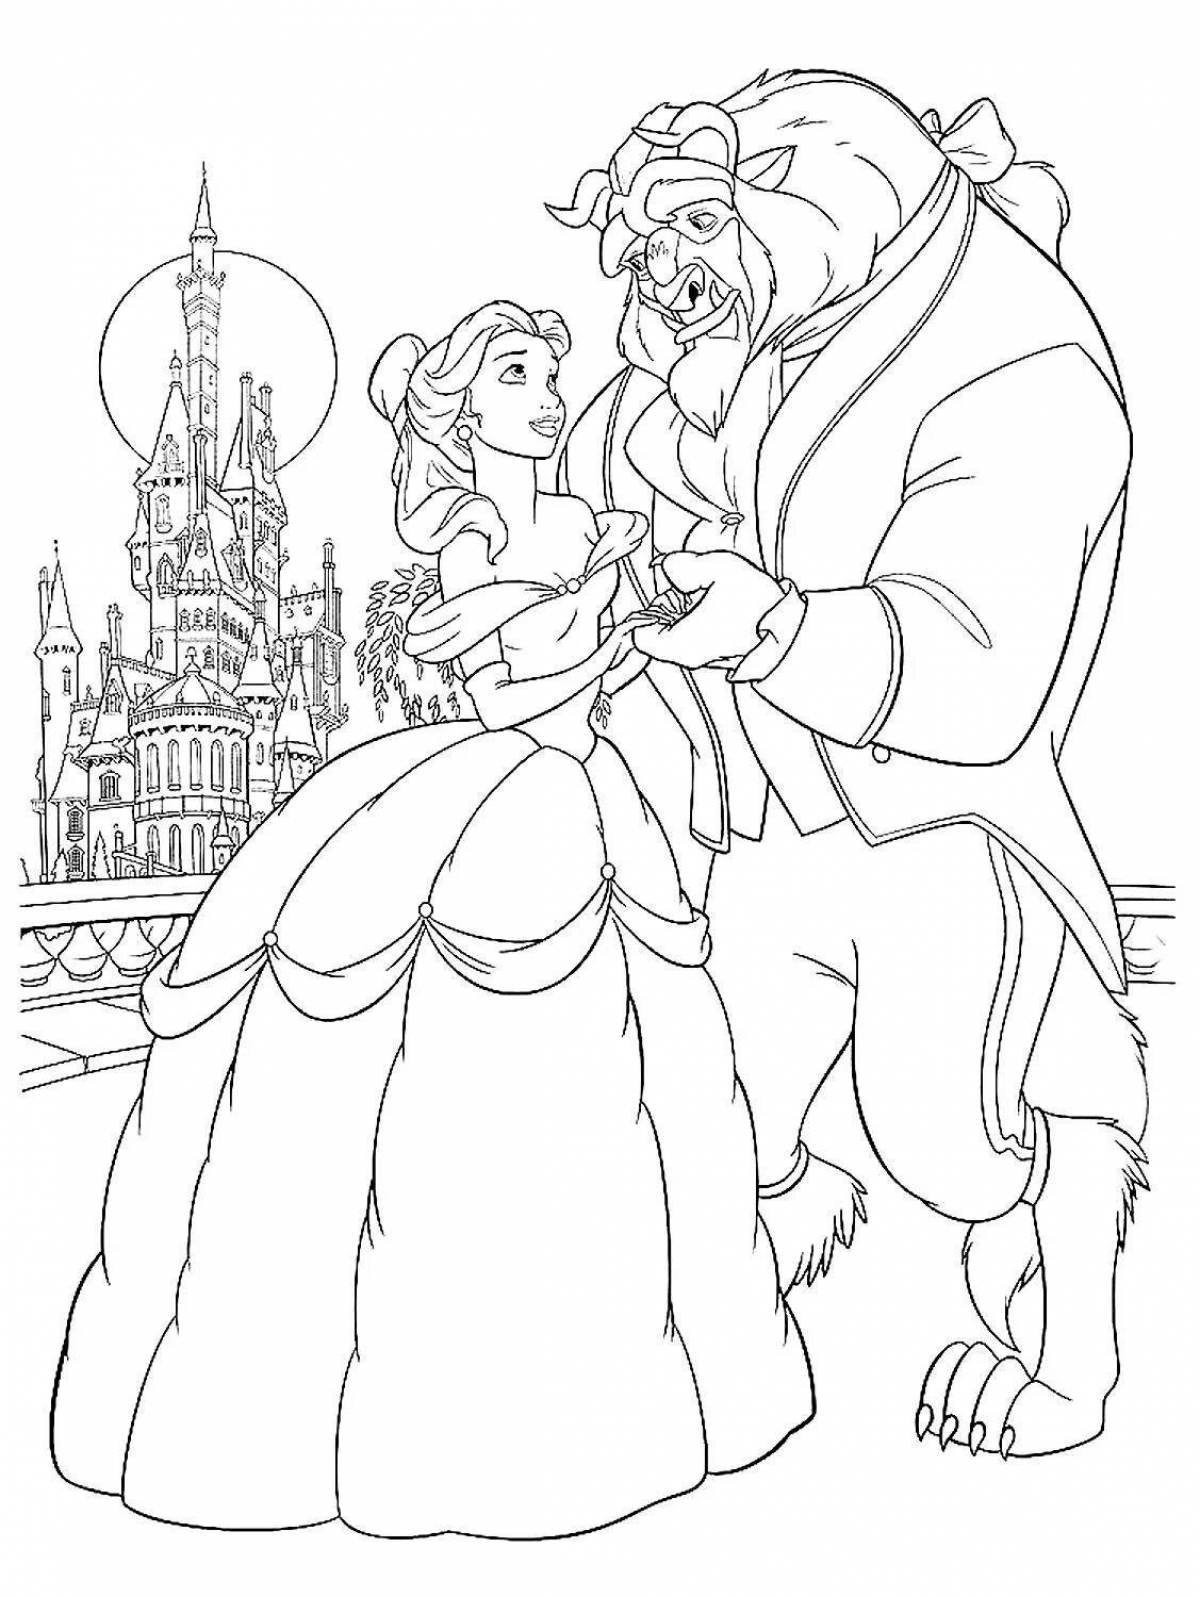 Dazzling belle and the monster coloring book